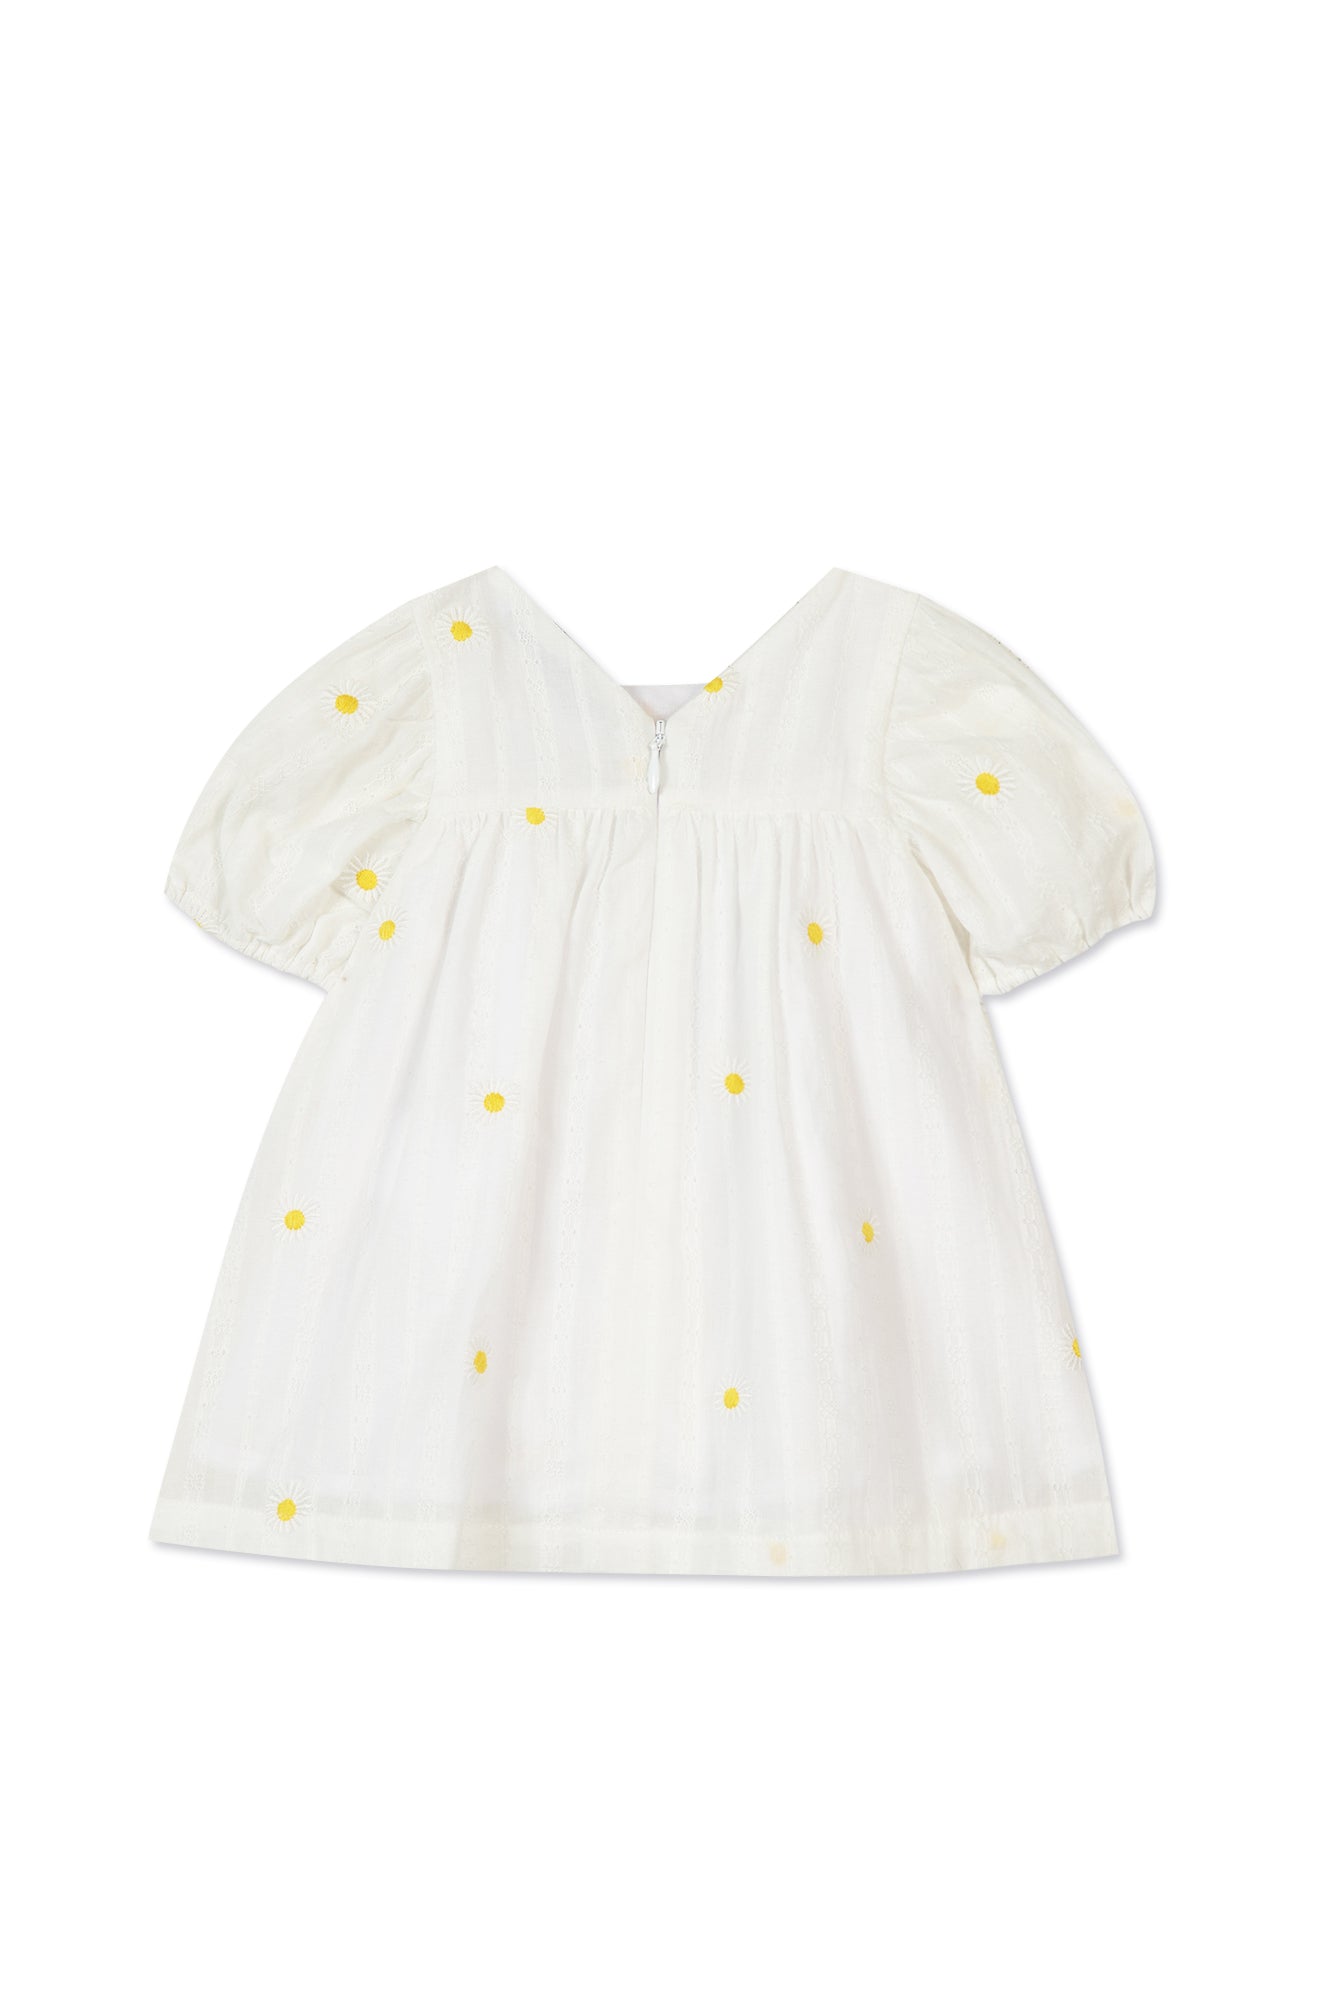 Outfit short - White margueres Embroideredes White / 6M